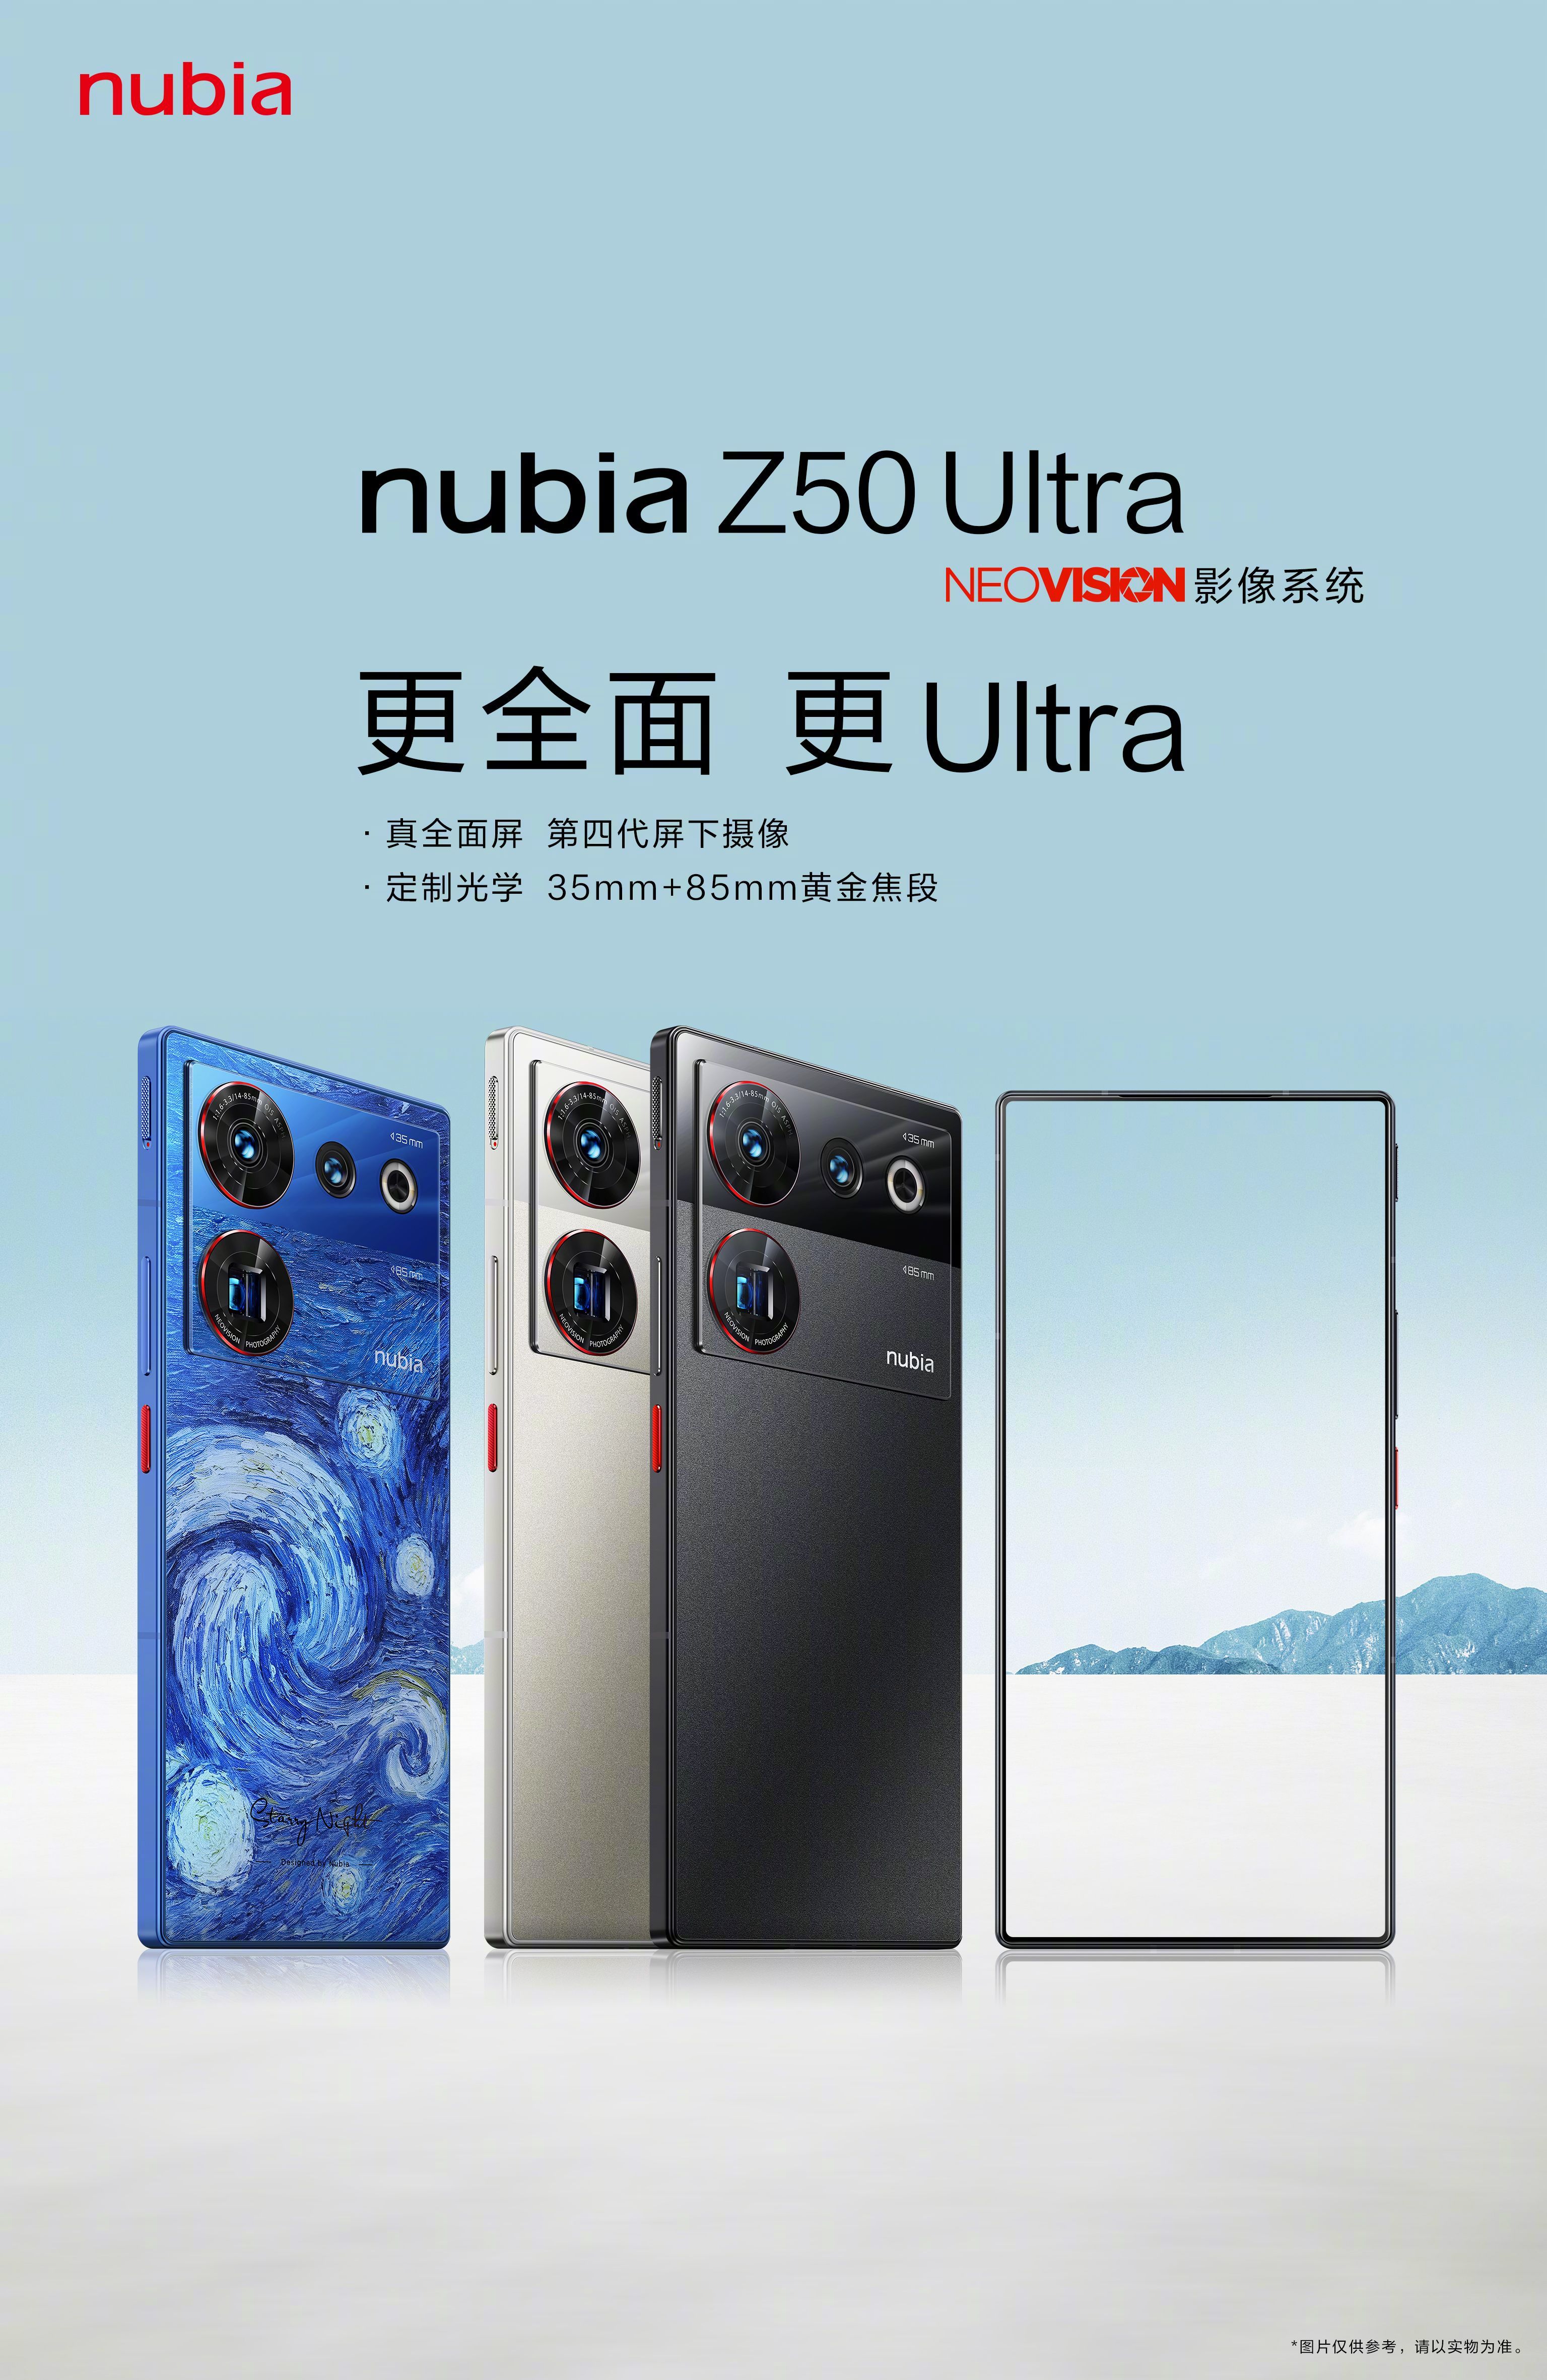 Nubia Z50 Ultra launched with DSLR-like custom cameras